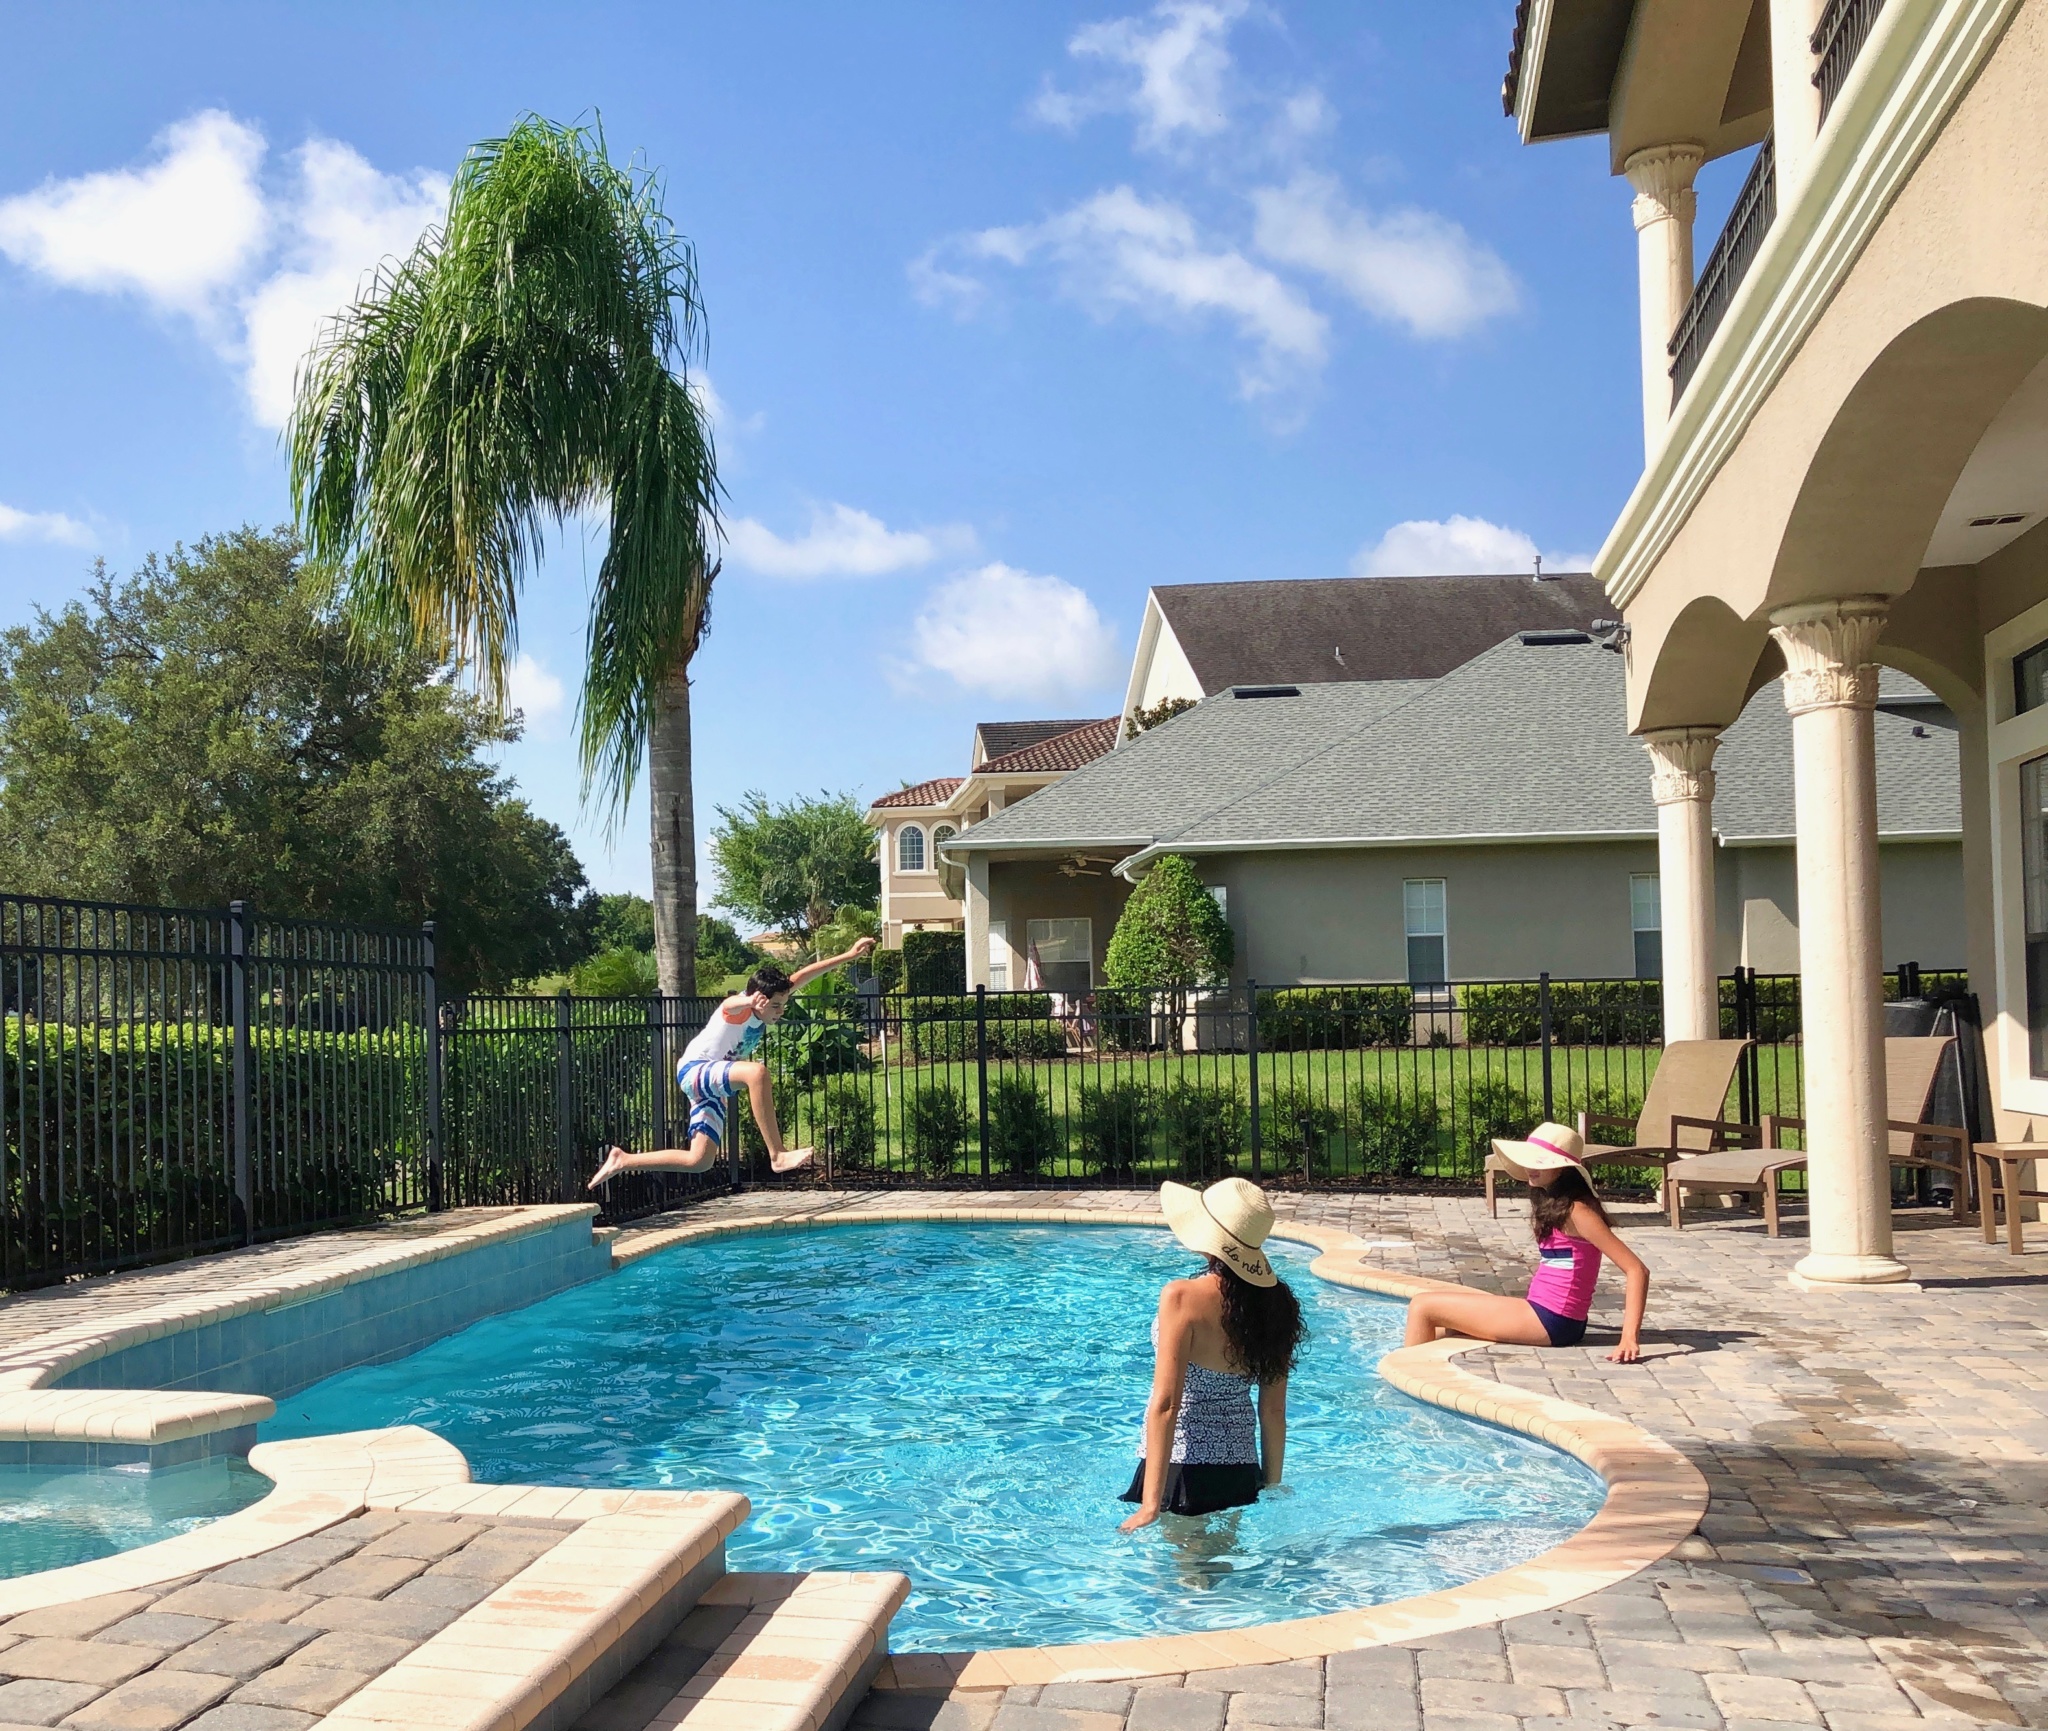 Reunion Resort Luxury Vacation Homes: The Best Way to Stay in Orlando